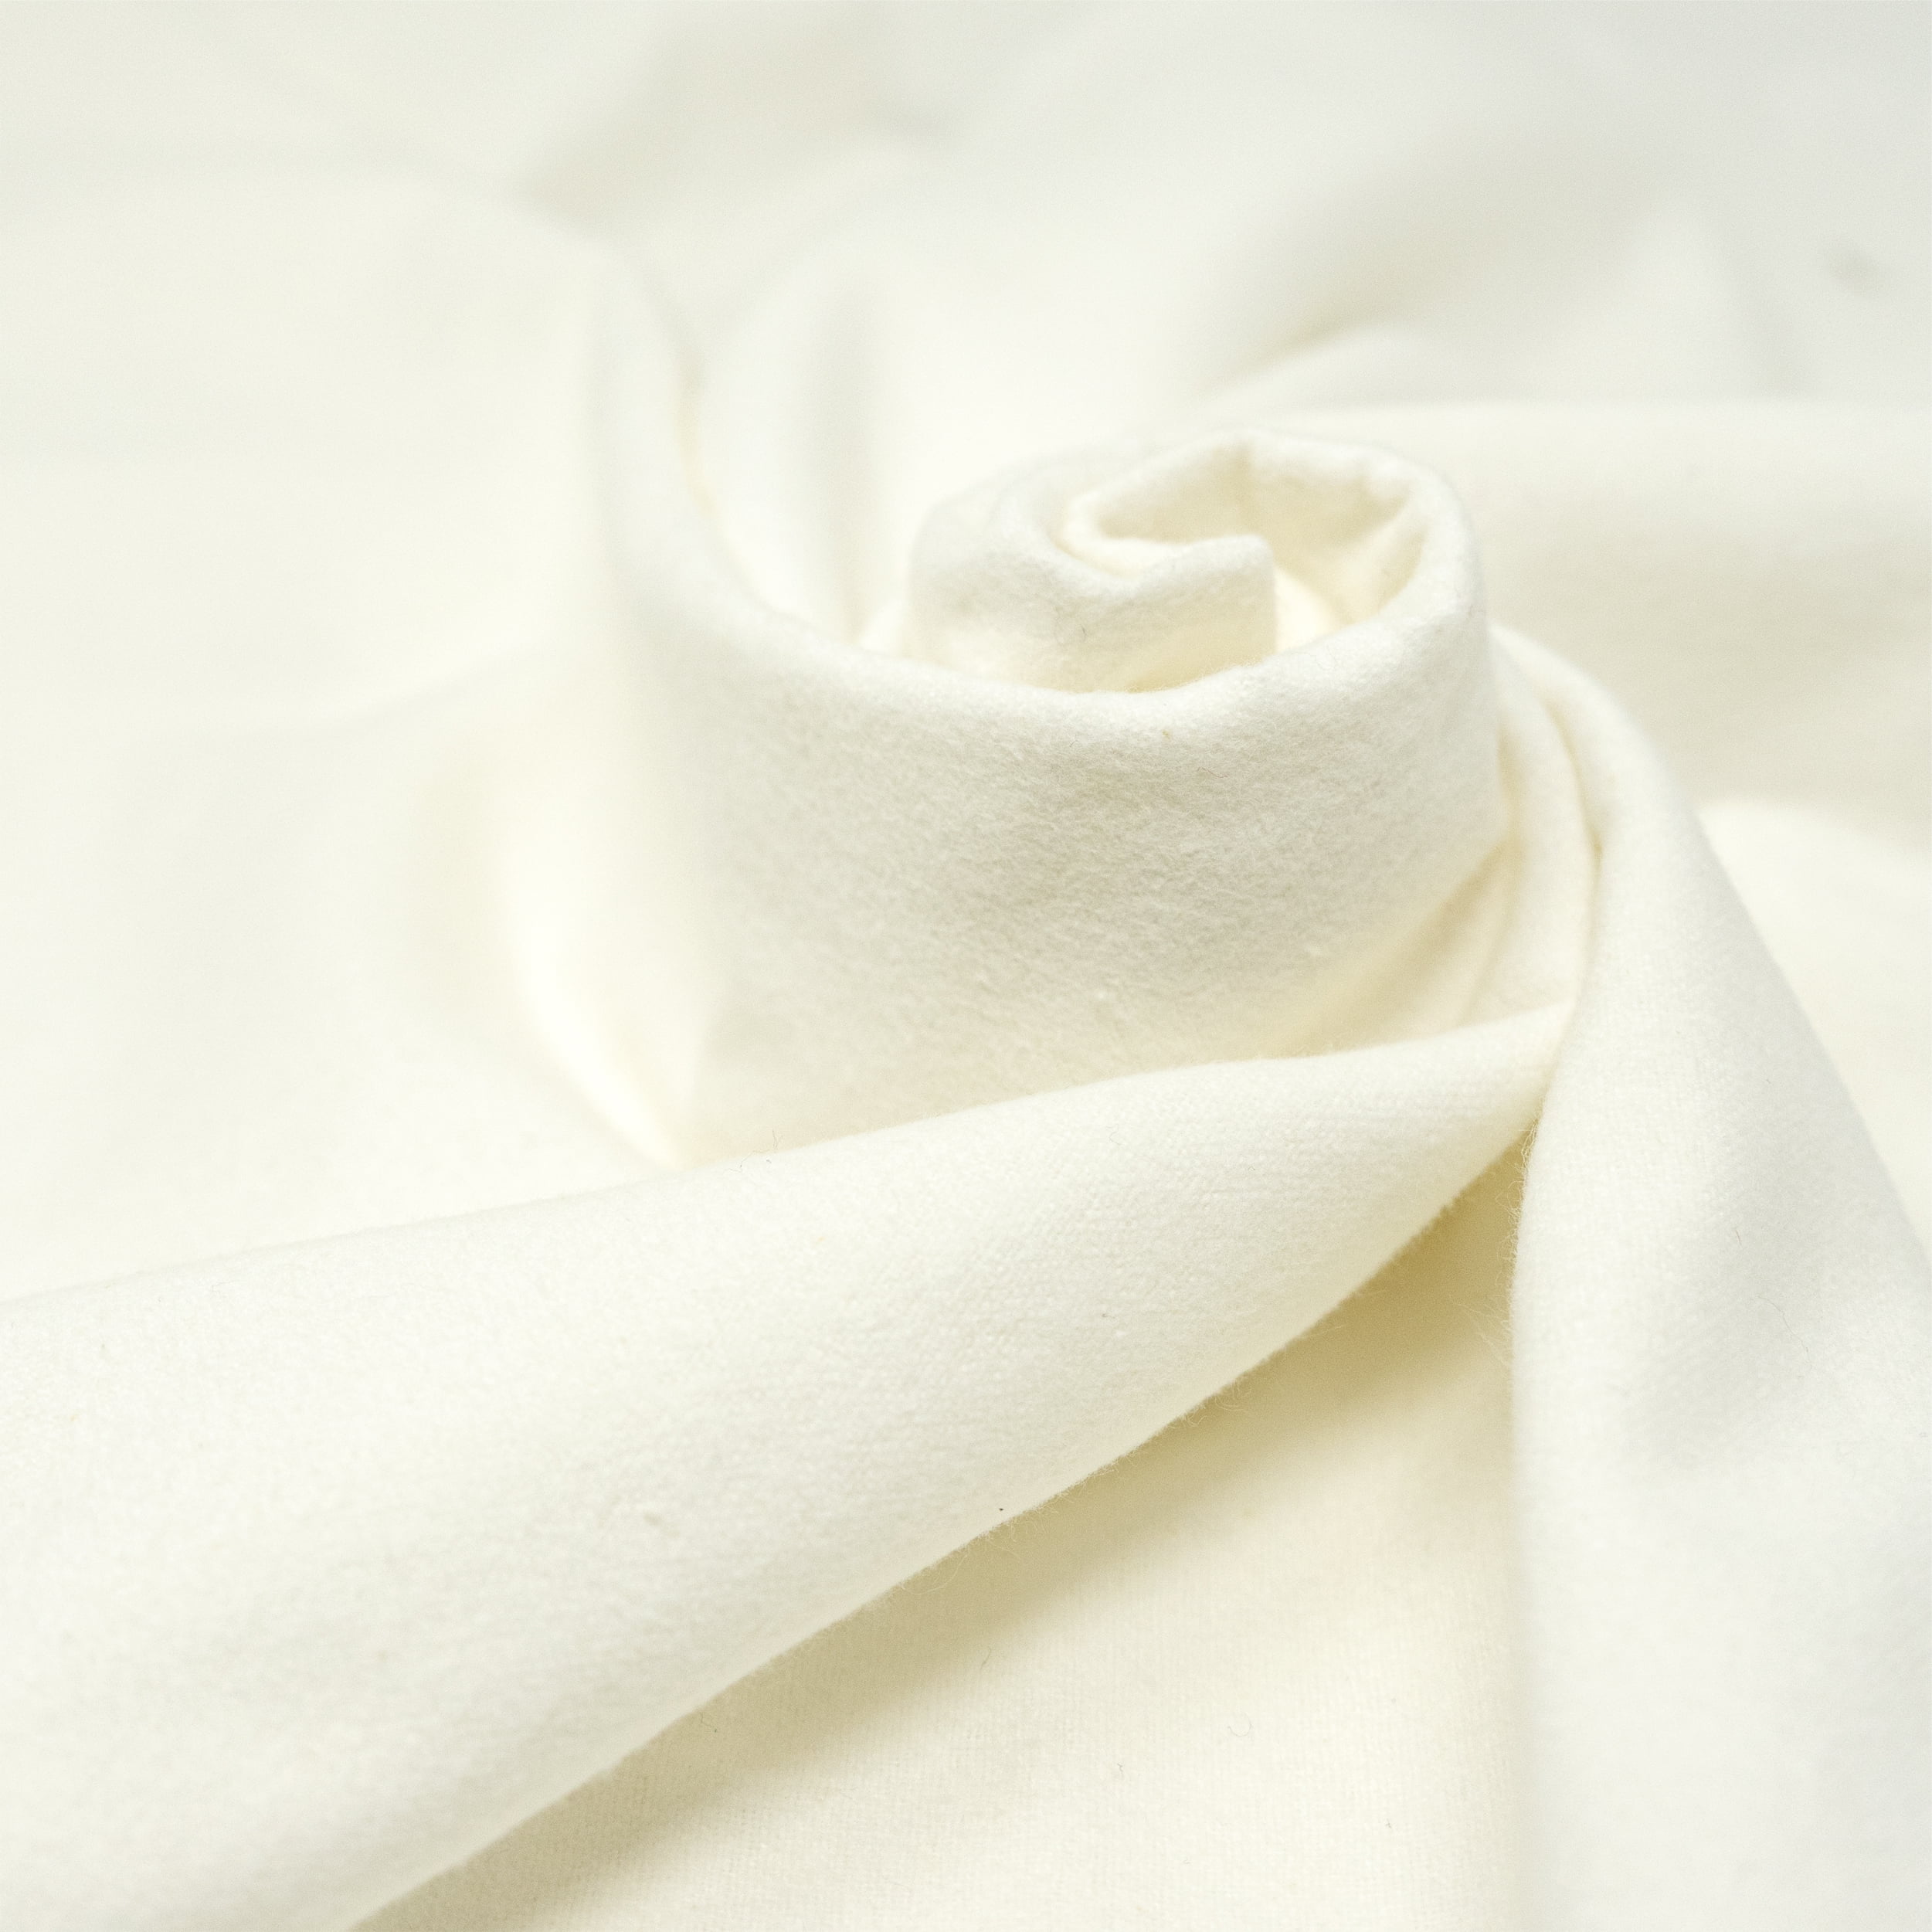 RTC Fabrics 42 inch/43 inch 100% Cotton Flannel Solid Crafting Fabric 8 yd by The Bolt, White, Size: 8 yds x 42 inch/43 inch